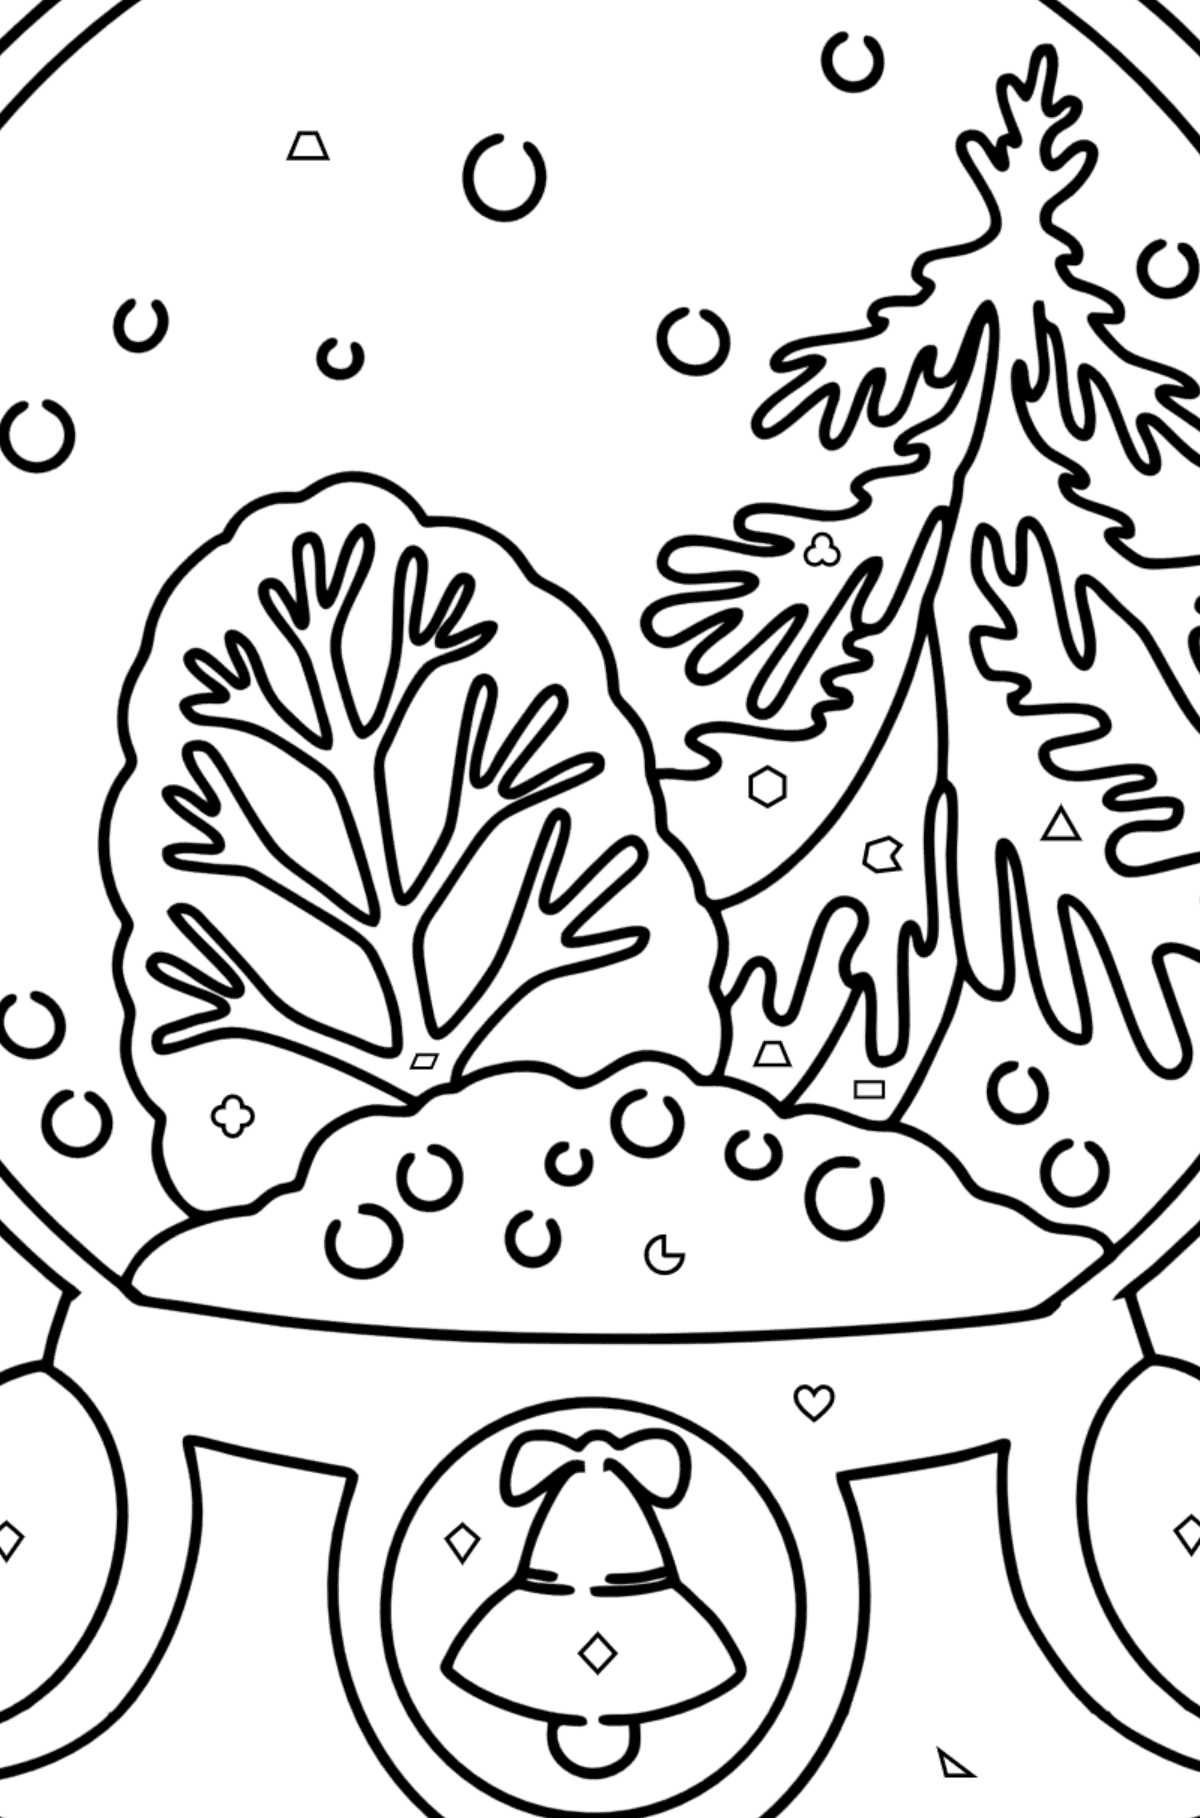 Snow Globe coloring page - Coloring by Geometric Shapes for Kids